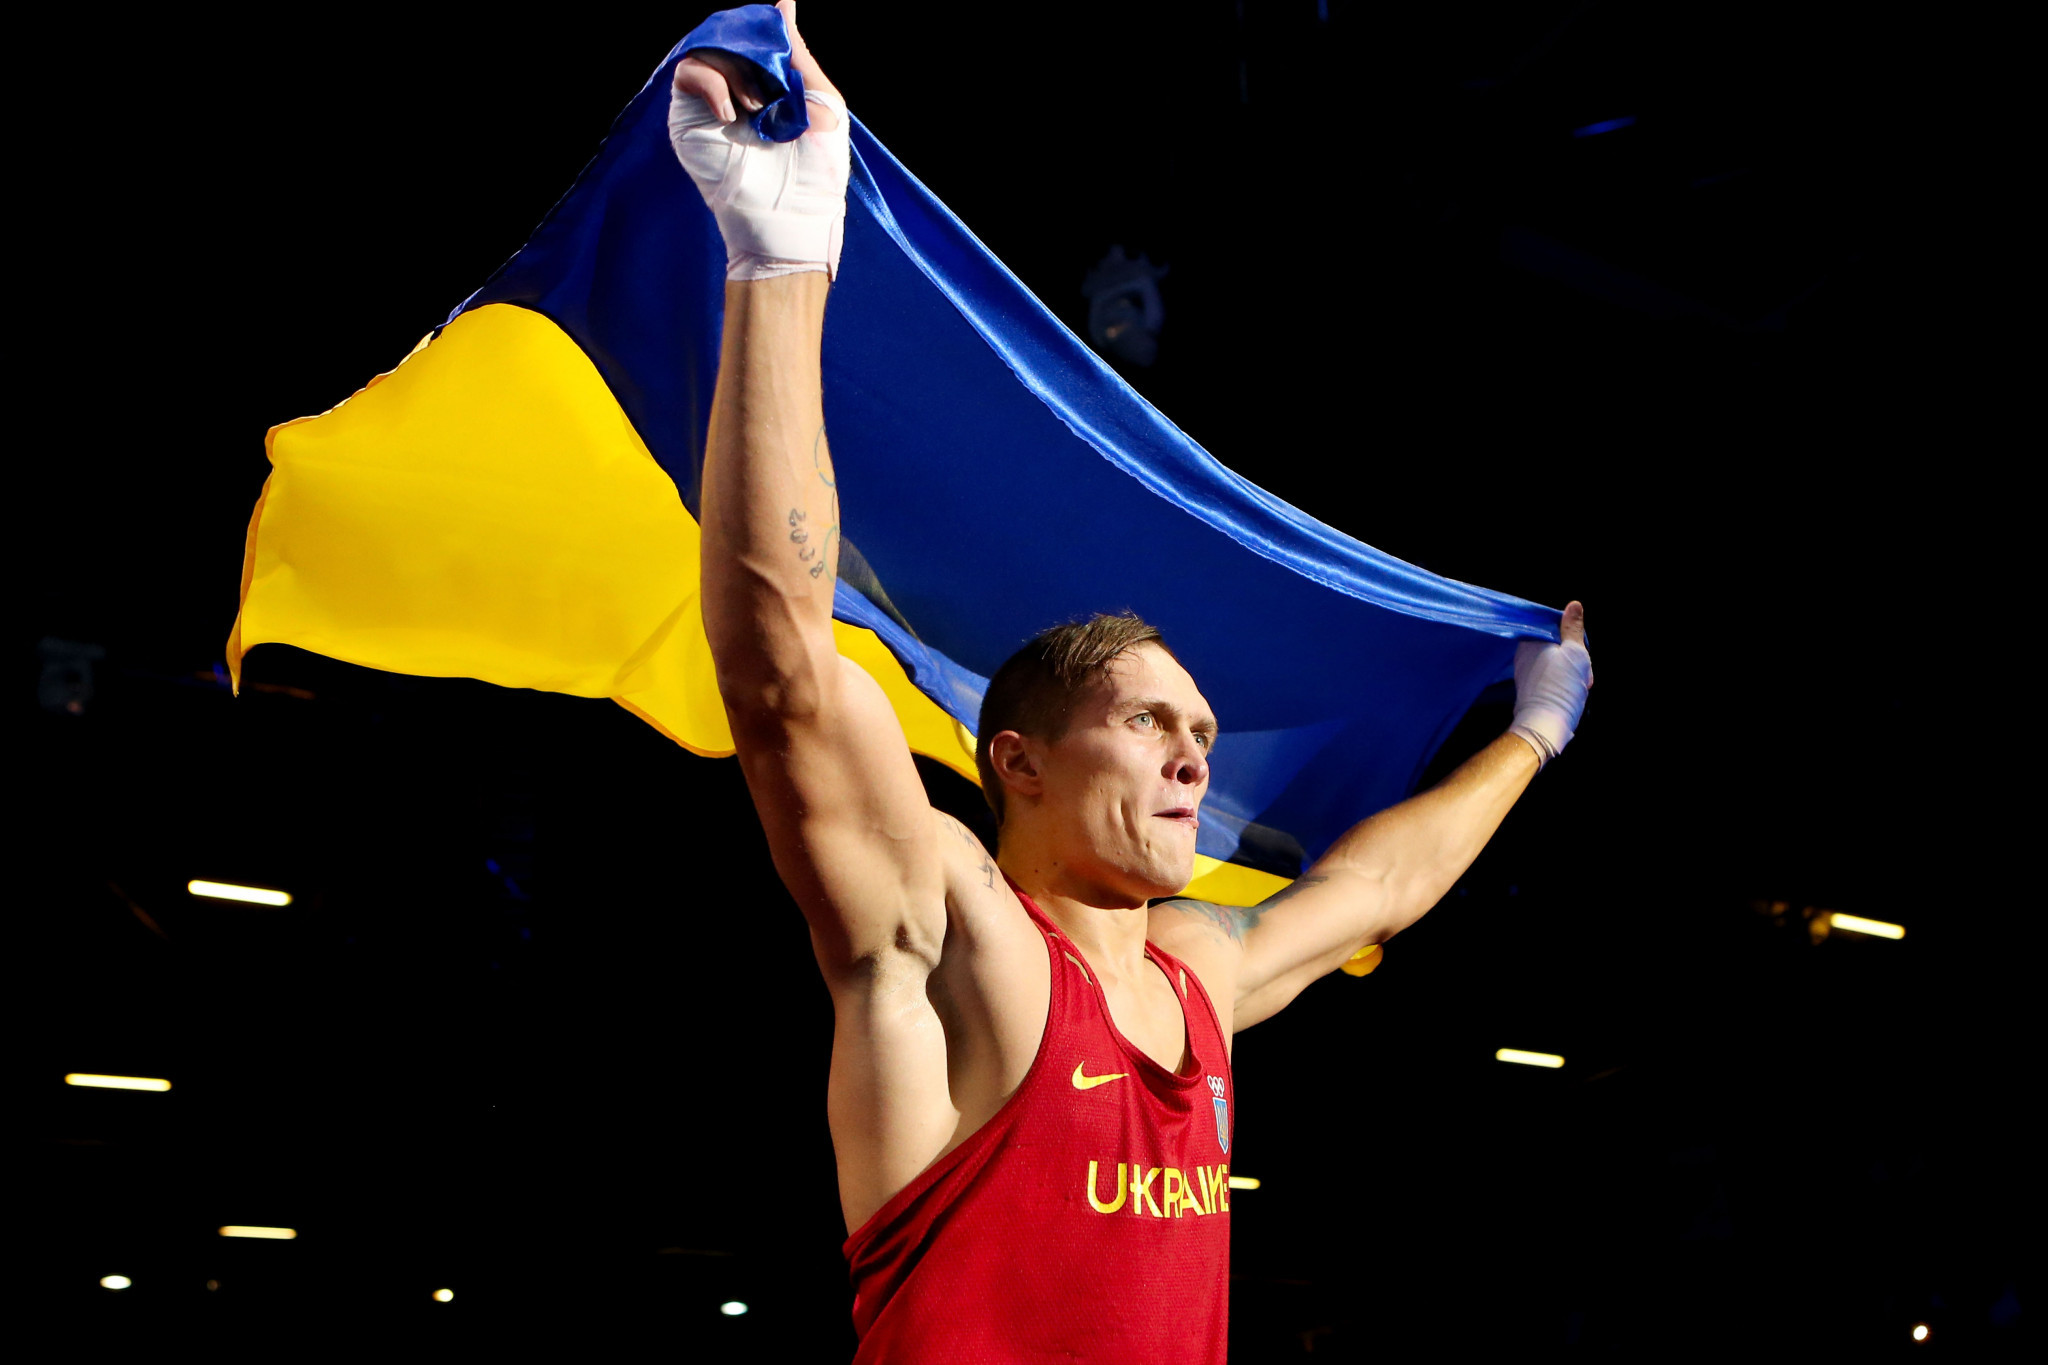 Our columnist argues that Ukrainian fighter Oleksandr Usyk may be clever and cute enough to defeat Fury ©Getty Images